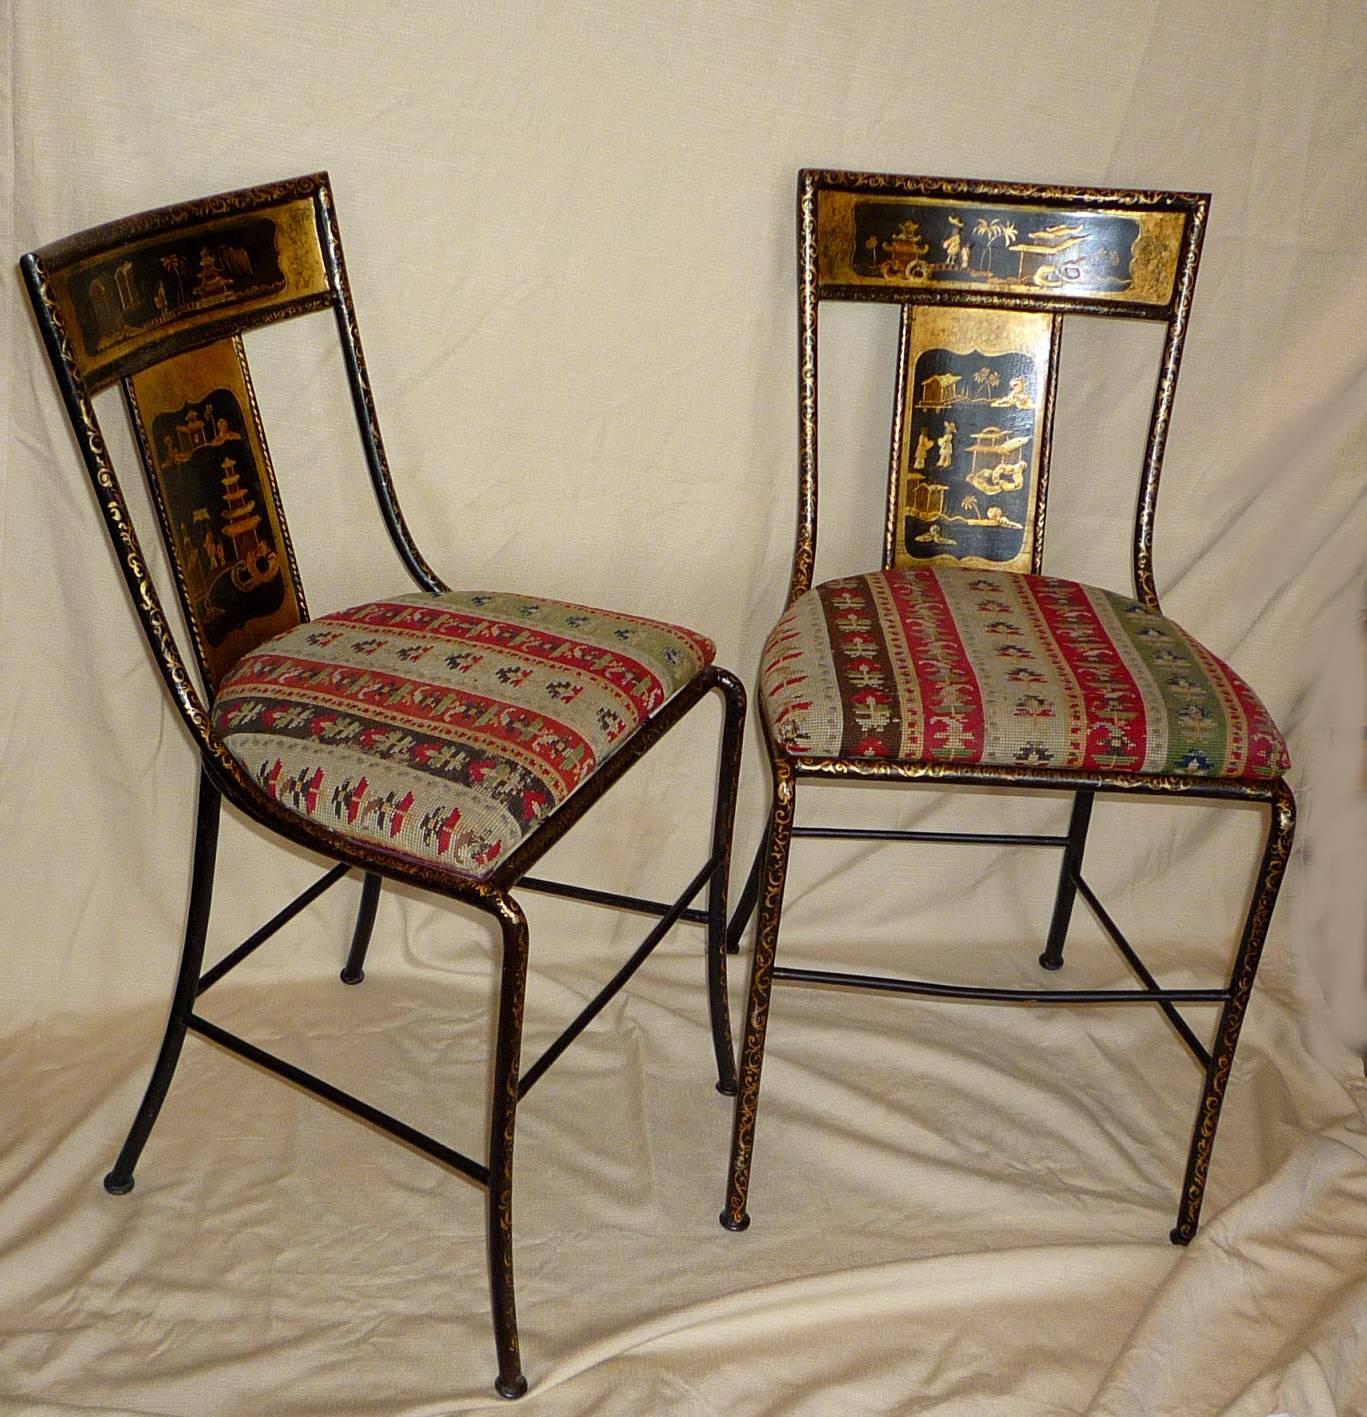 A pair of English Victorian period painted iron chairs, with chinoiserie gold and black decoration, the seats with original needlepoint covers. Provenance: Madeleine Castaing.
 